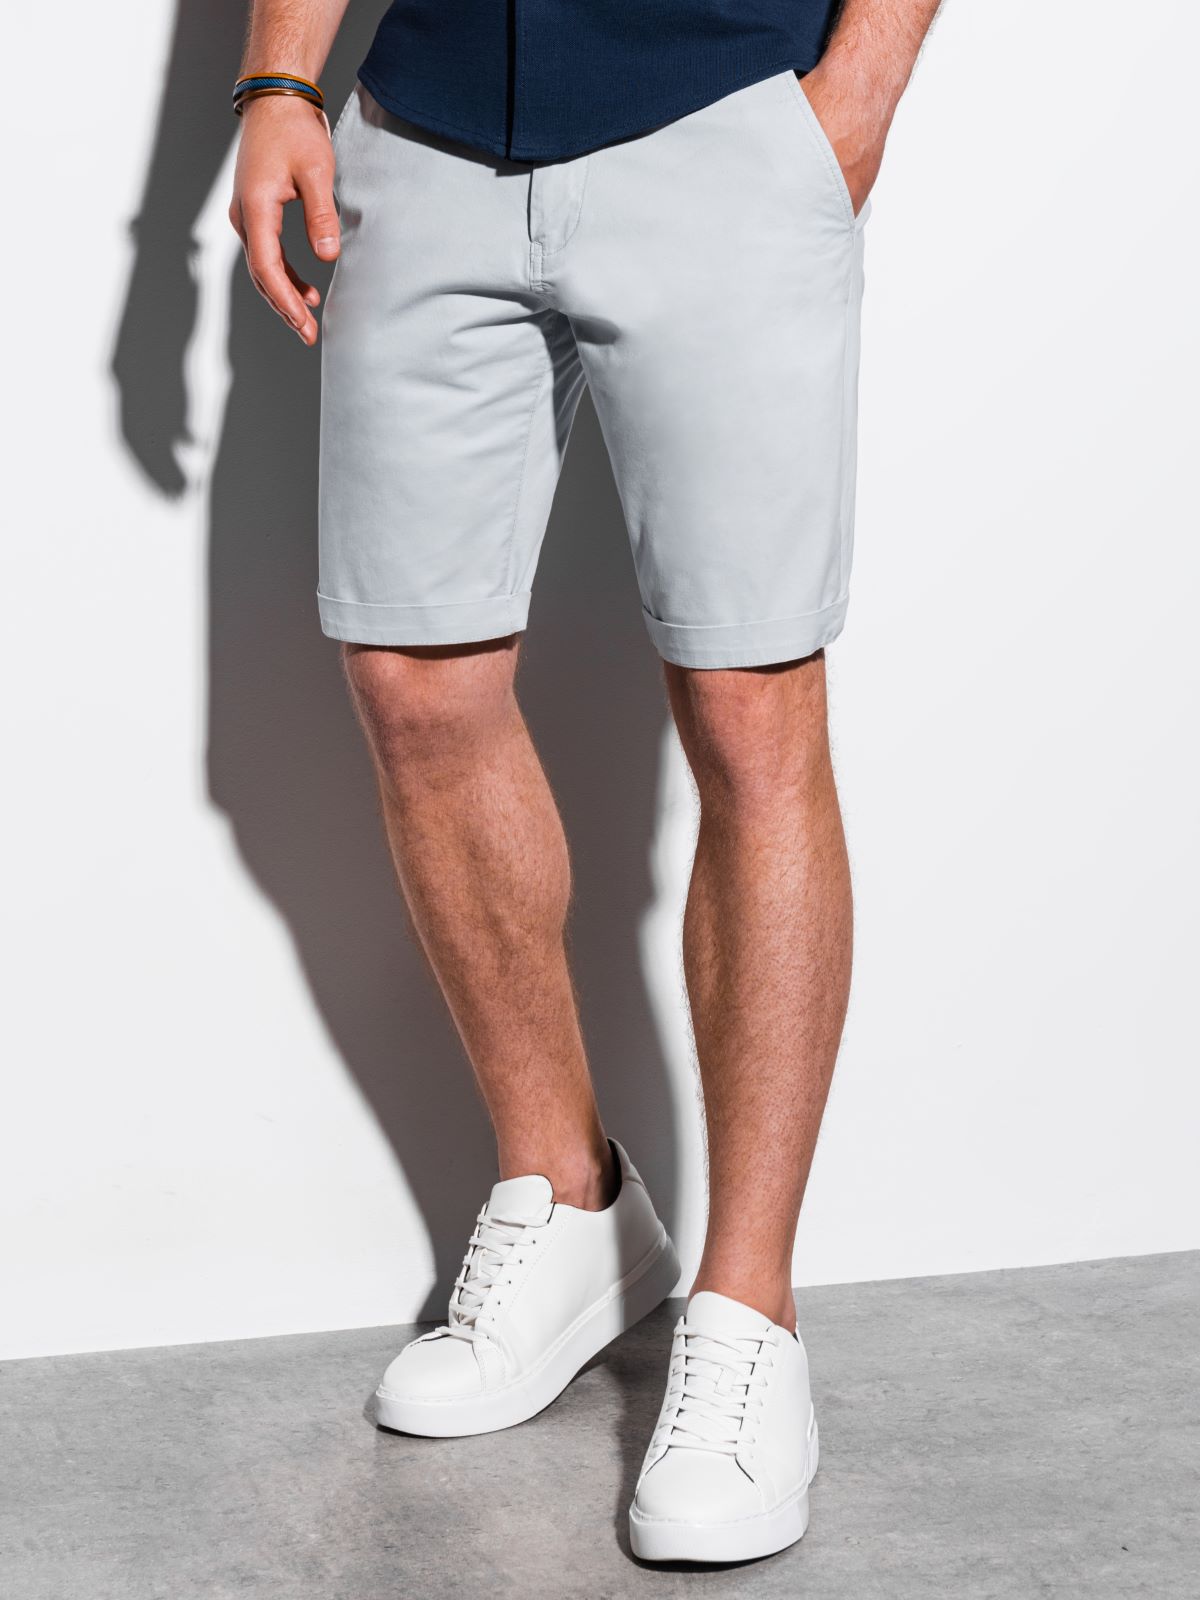 mens slip on shoes with shorts